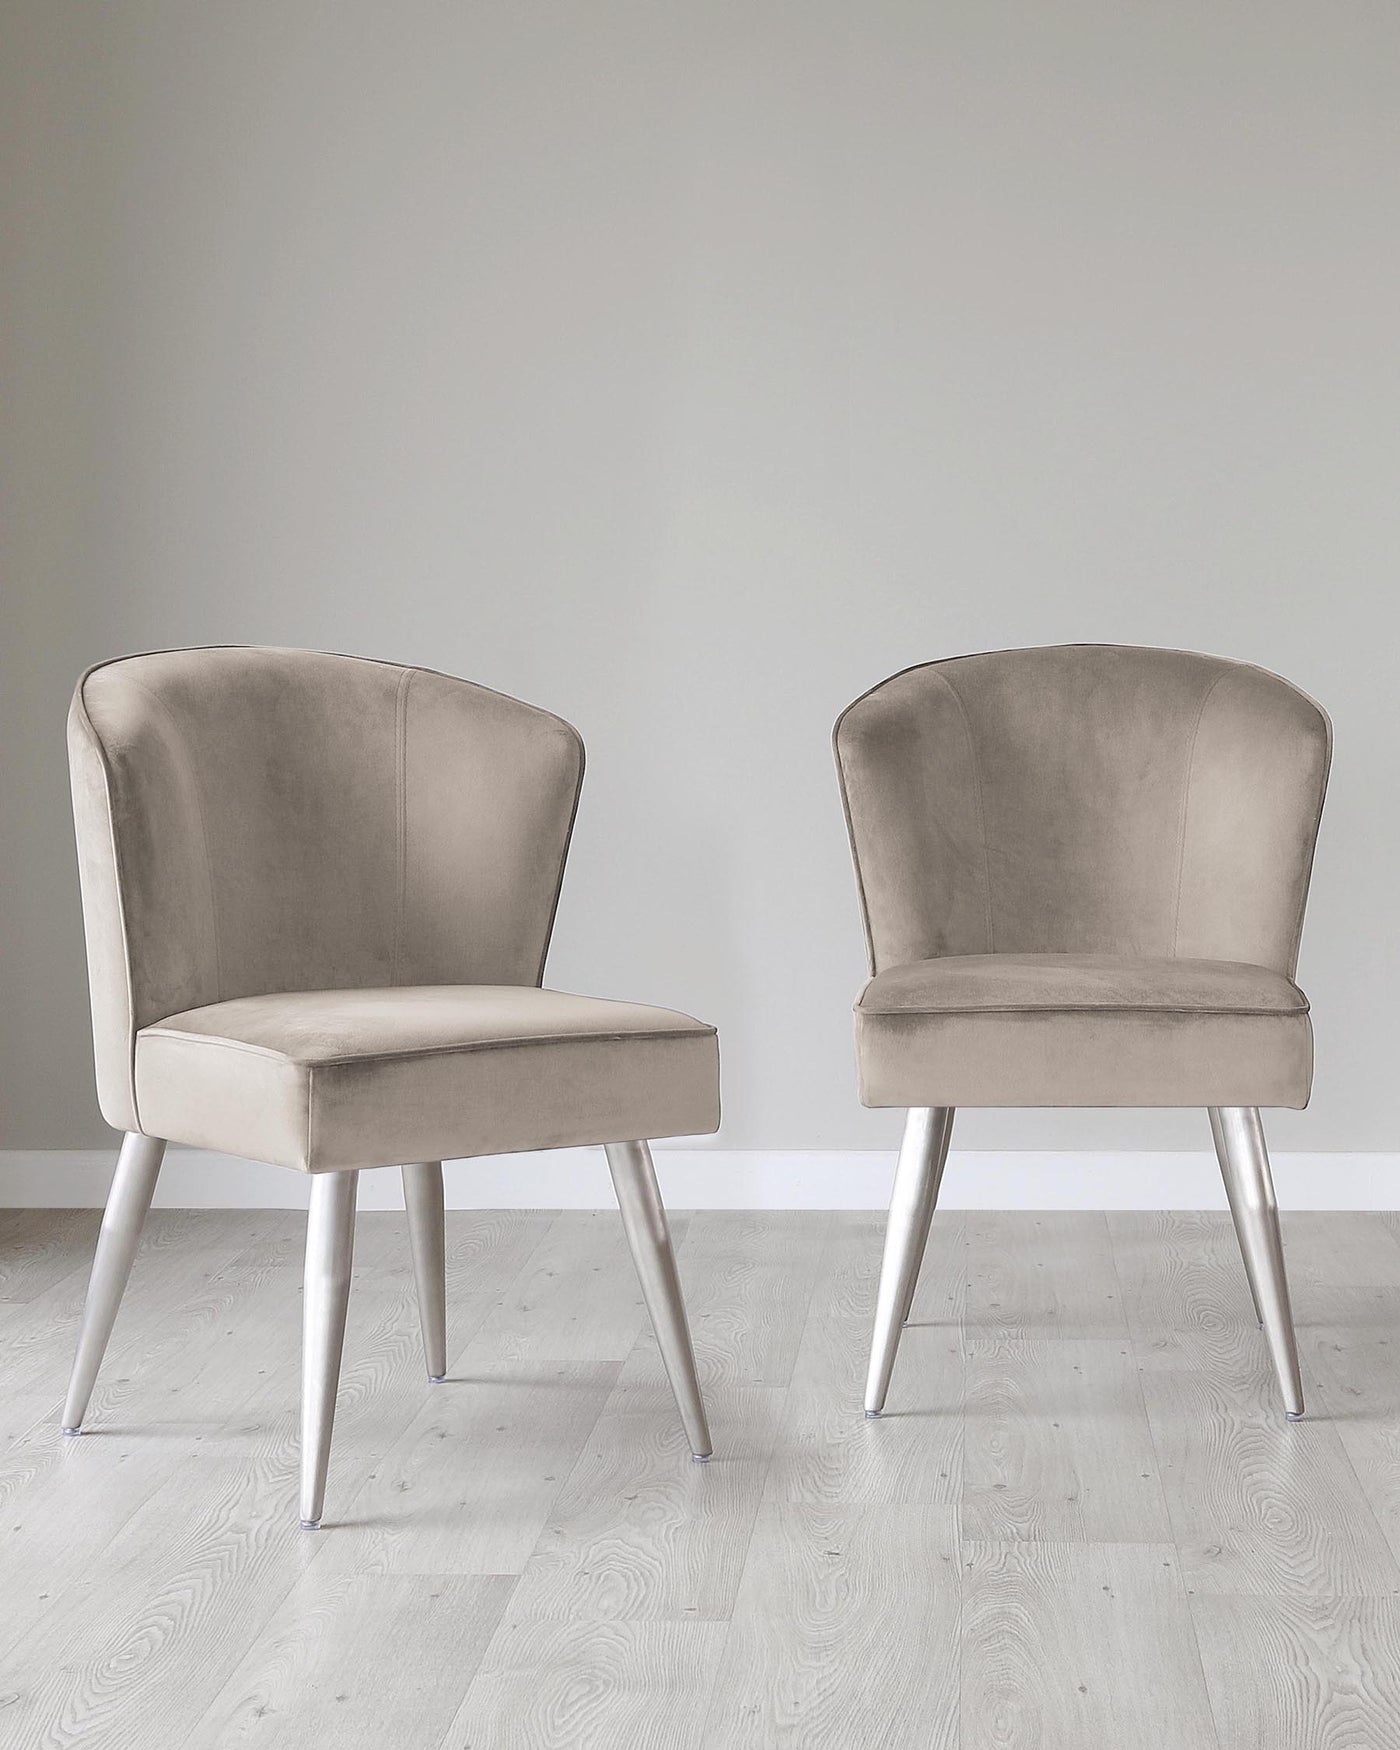 Two contemporary style dining chairs with taupe upholstery and tapered metallic silver legs on a light hardwood floor against a neutral wall.